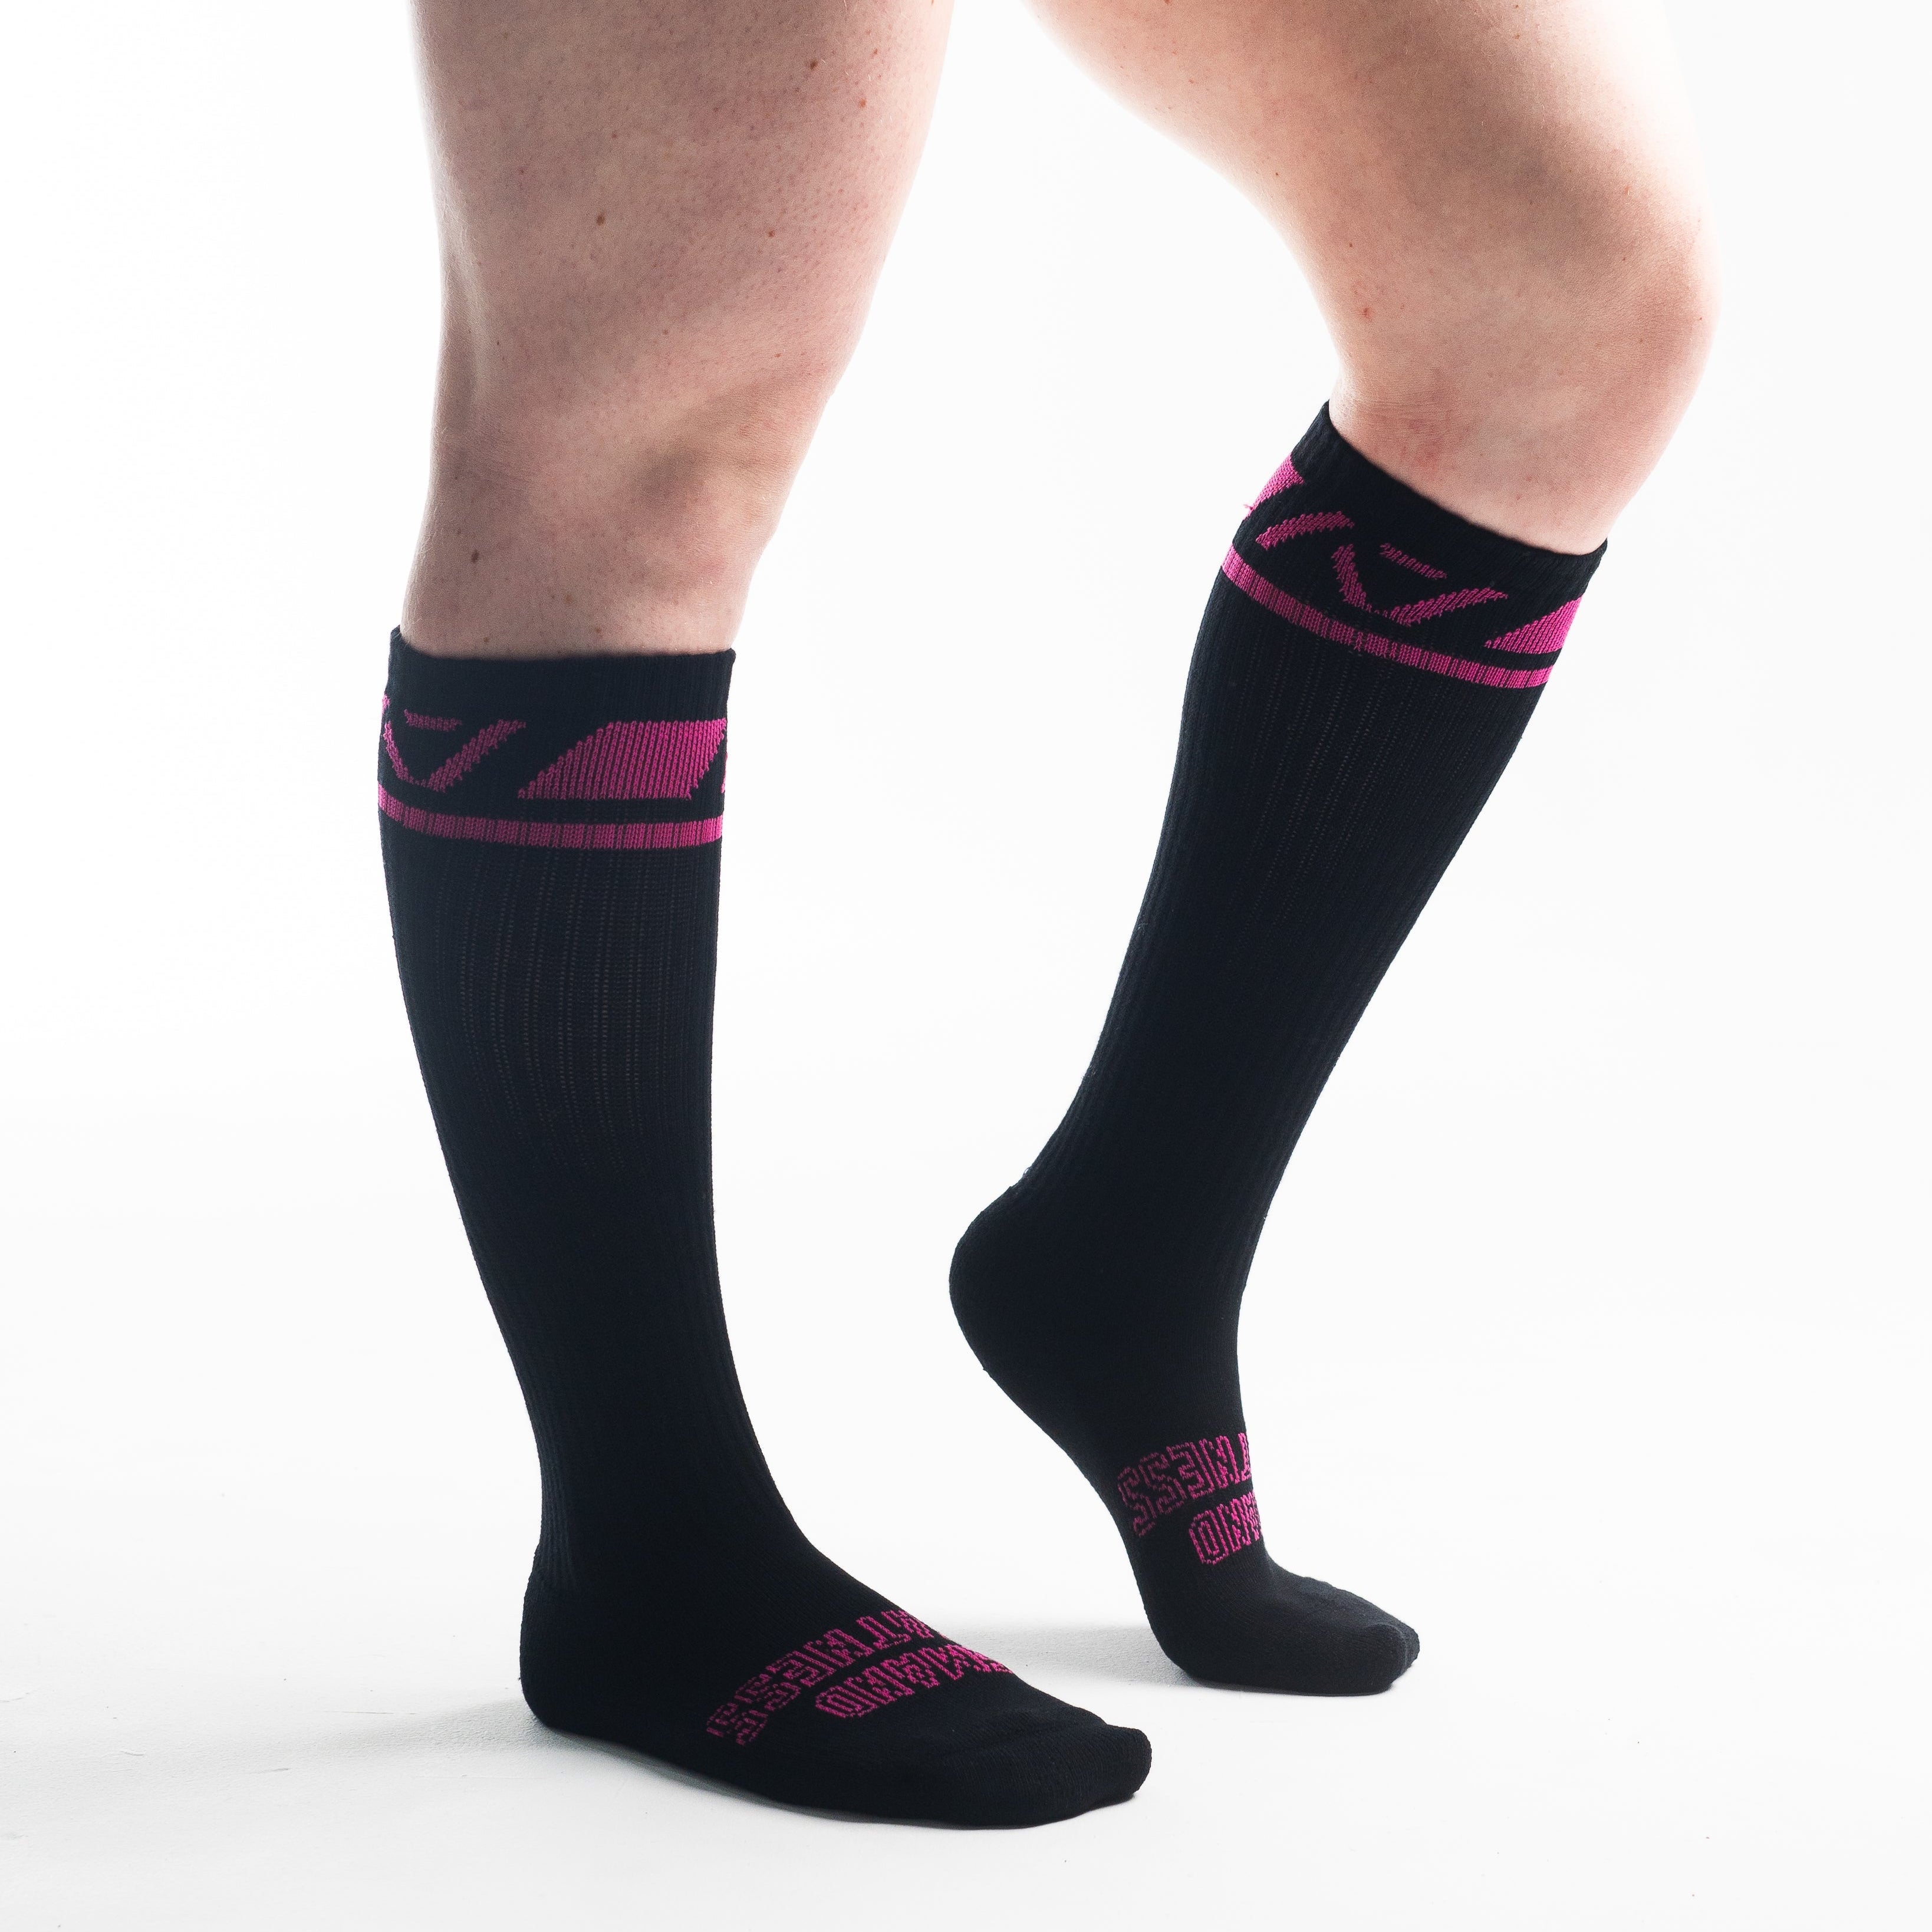 A7 Flamingo Deadlift socks are designed specifically for pulls and keep your shins protected from scrapes. A7 deadlift socks are a perfect pair to wear in training or powerlifting competition. The IPF Approved Kit includes Powerlifting Singlet, A7 Meet Shirt, A7 Zebra Wrist Wraps, A7 Deadlift Socks, Hourglass Knee Sleeves (Stiff Knee Sleeves and Rigor Mortis Knee Sleeves). Genouillères powerlifting shipping to France, Spain, Ireland, Germany, Italy, Sweden and EU.